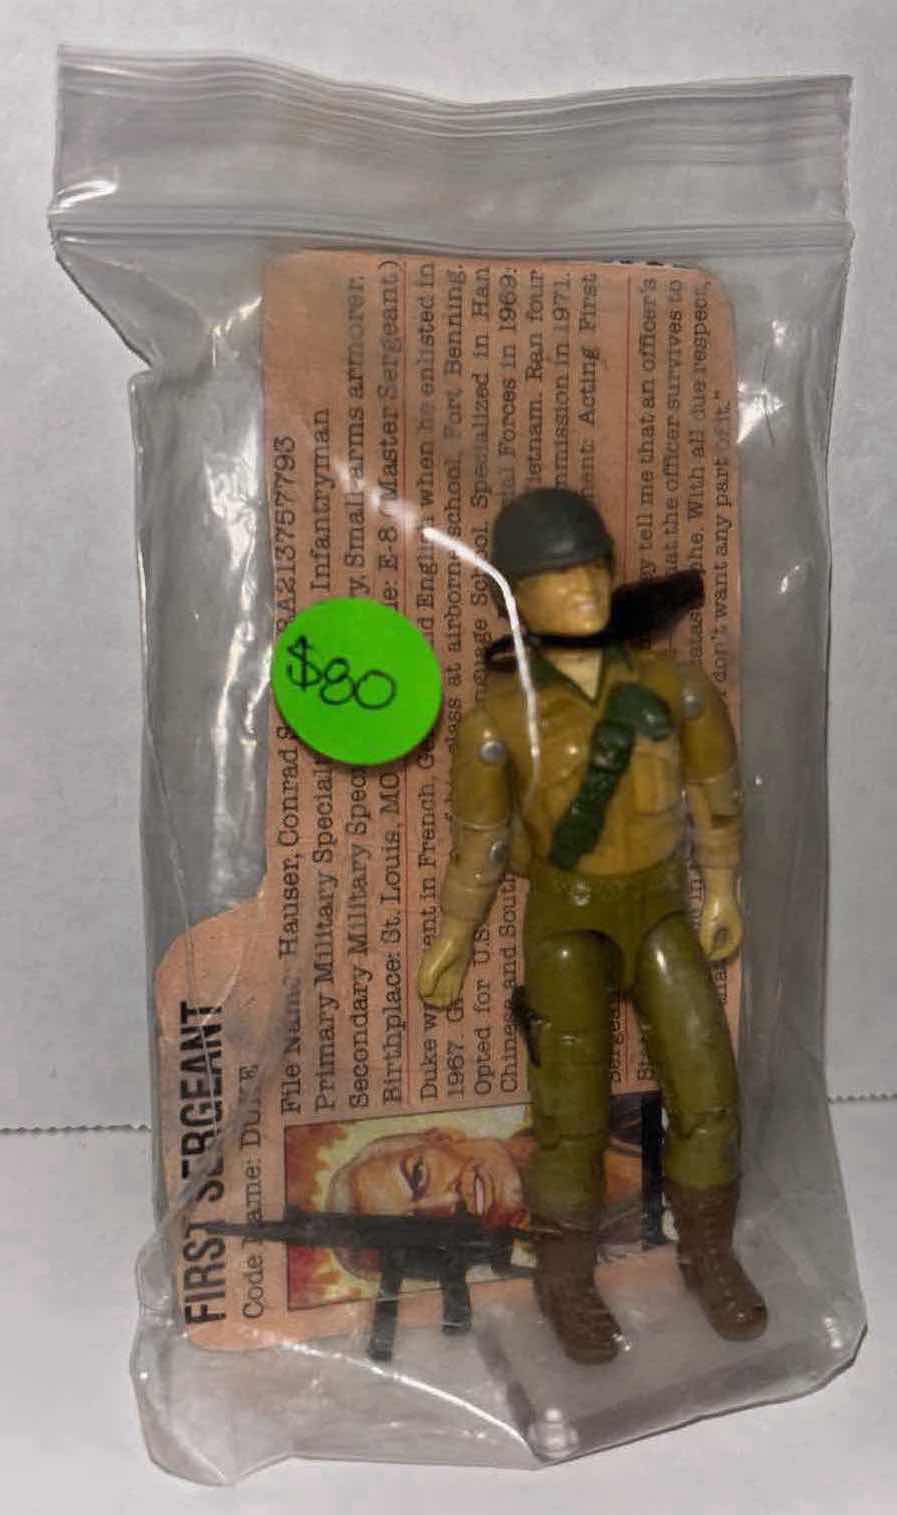 Photo 4 of VINTAGE G.I. JOE 2-PACK ACTION FIGURES & ACCESSORIES, “1985 COVERT OPERATIONS: LADY JAYE & 1983 FIRST SERGEANT: DUKE” INCLUDES CHARACTER FILE CARDS **NO RETURNS**